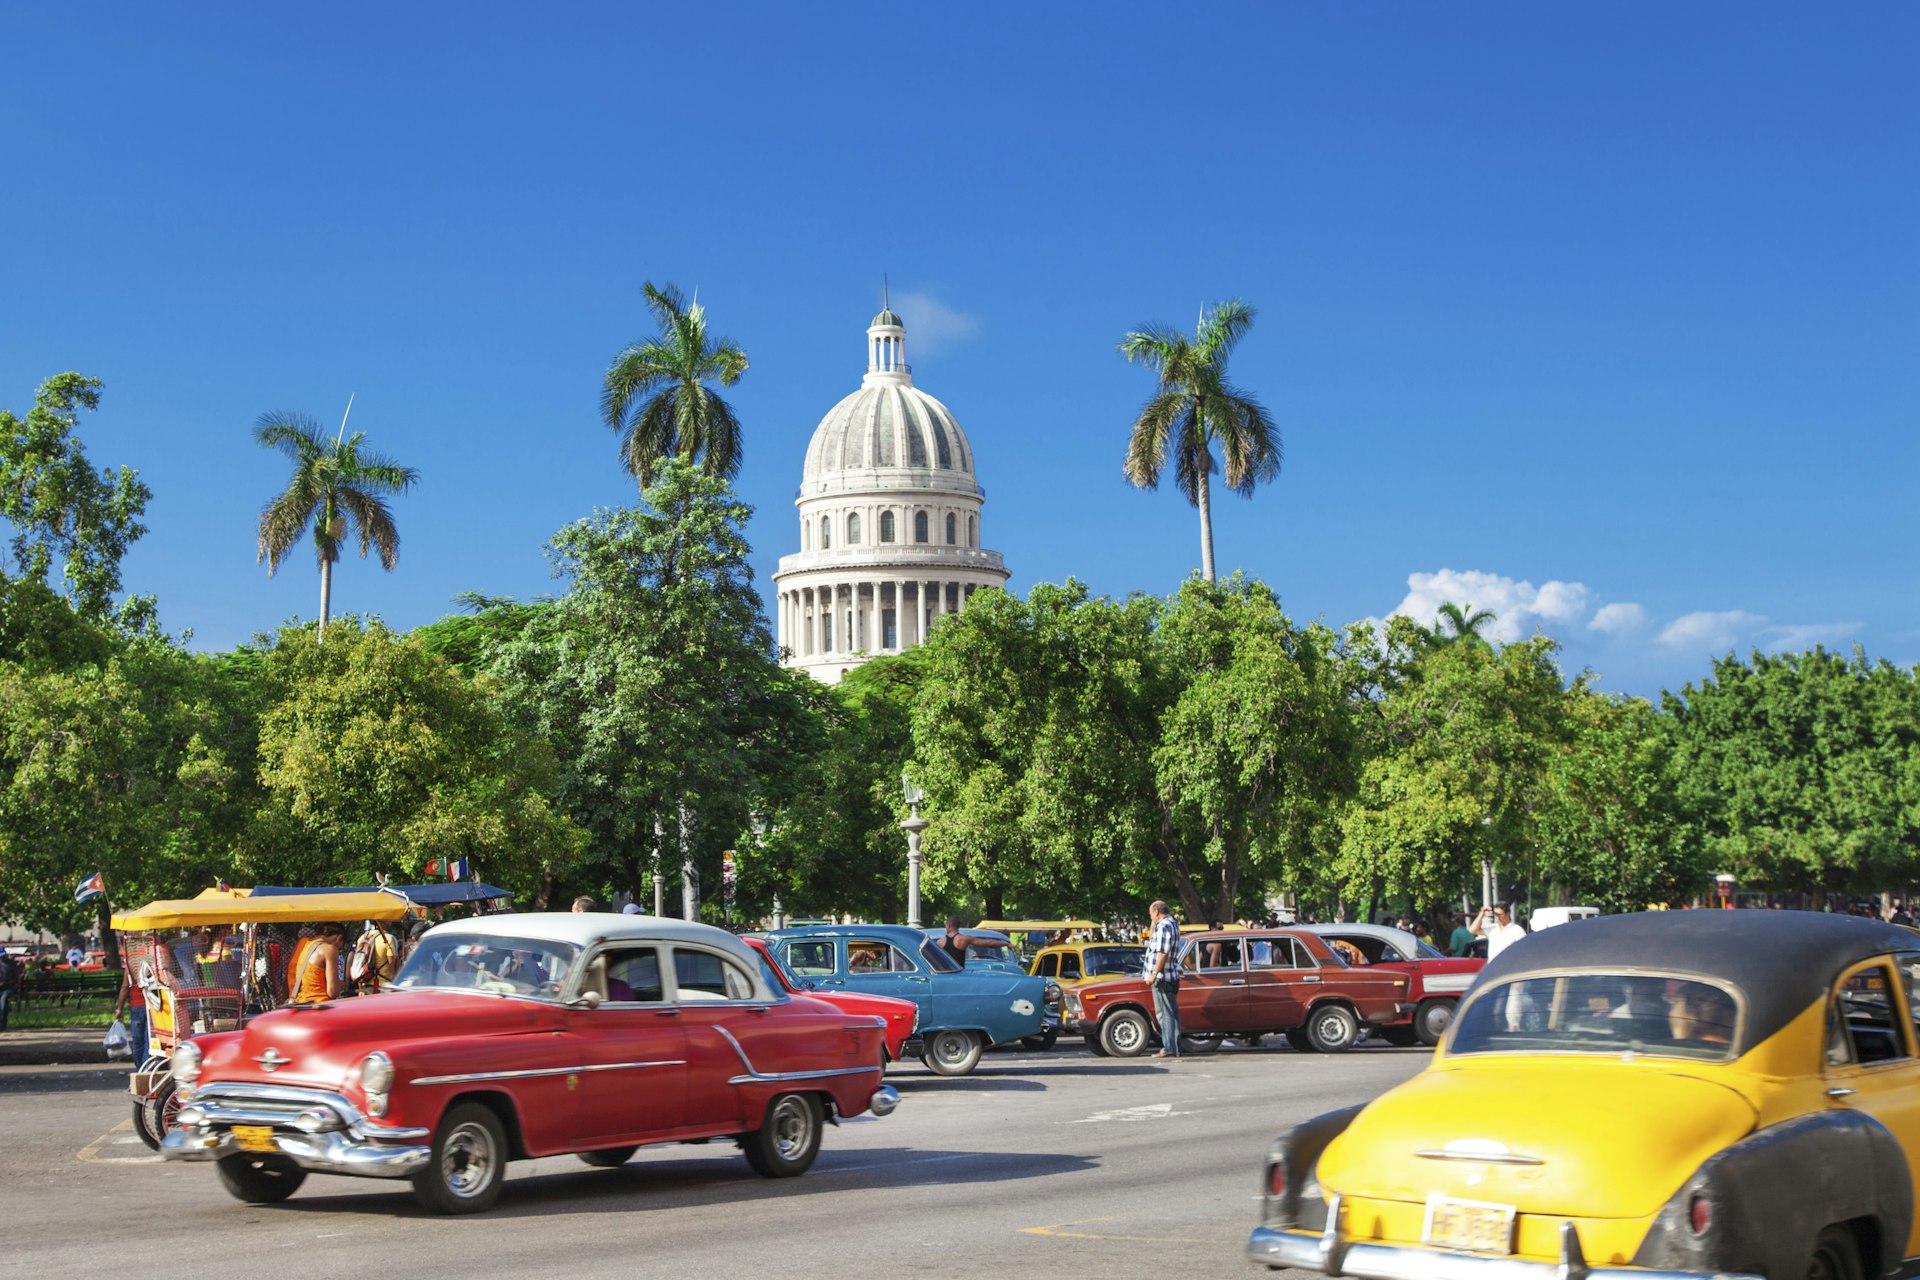 The dome of El Capitolio stands above trees and vintage cars